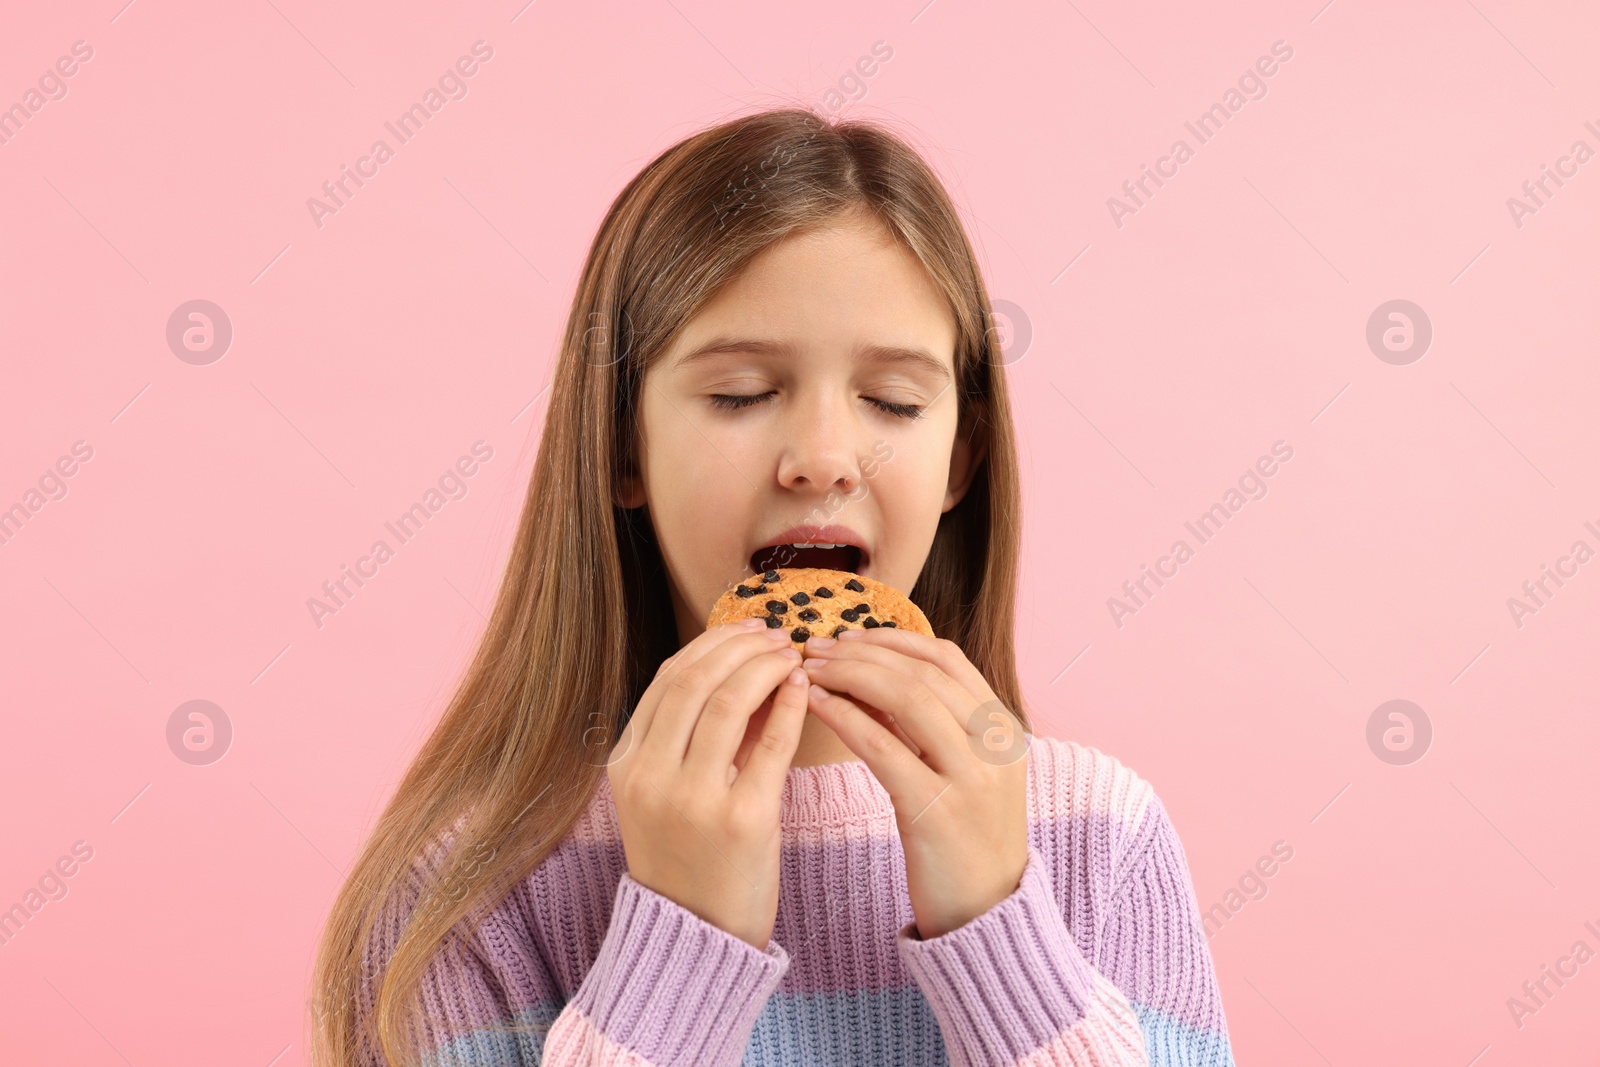 Photo of Cute girl eating chocolate chip cookie on pink background